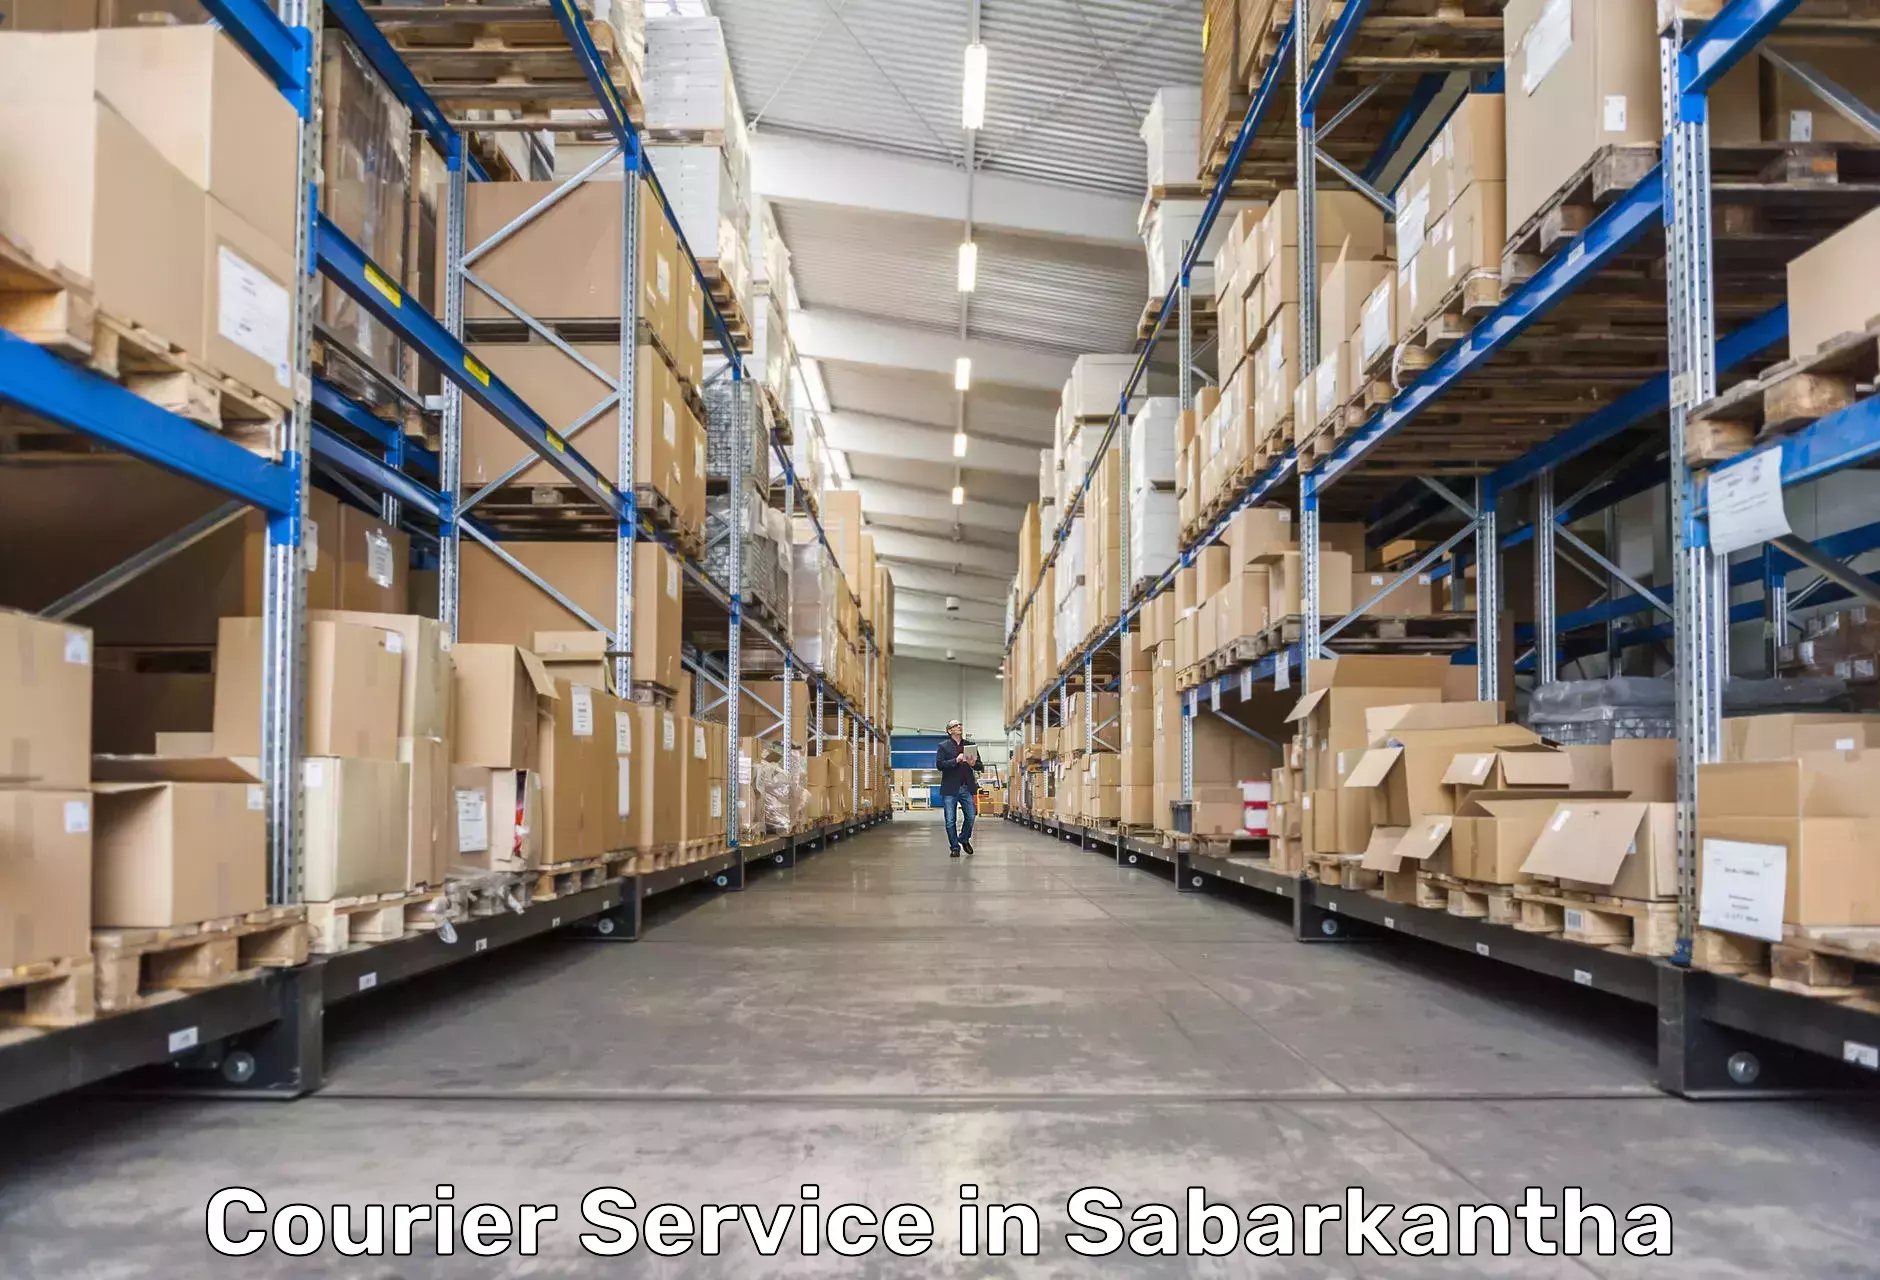 Flexible delivery schedules in Sabarkantha